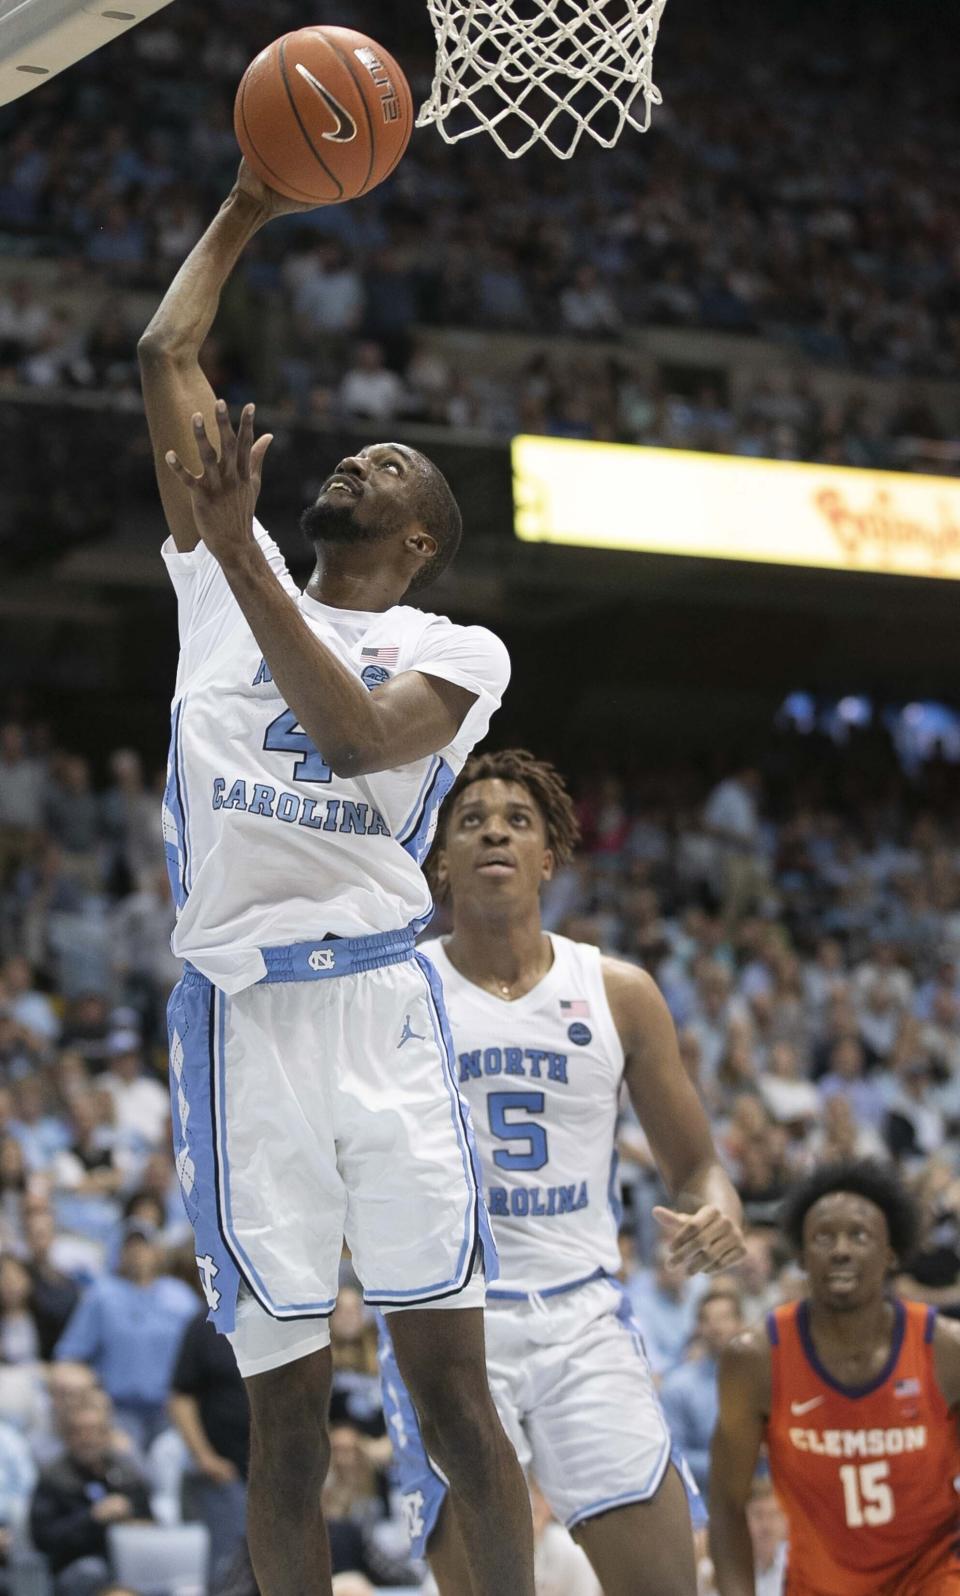 North Carolina's Brandon Robinson (4) drives to the basket in the first an NCAA college basketball game against Clemson on Saturday, Jan. 11, 2020, at the Smith Center in Chapel Hill, N.C. (Robert Willett/The News & Observer via AP)